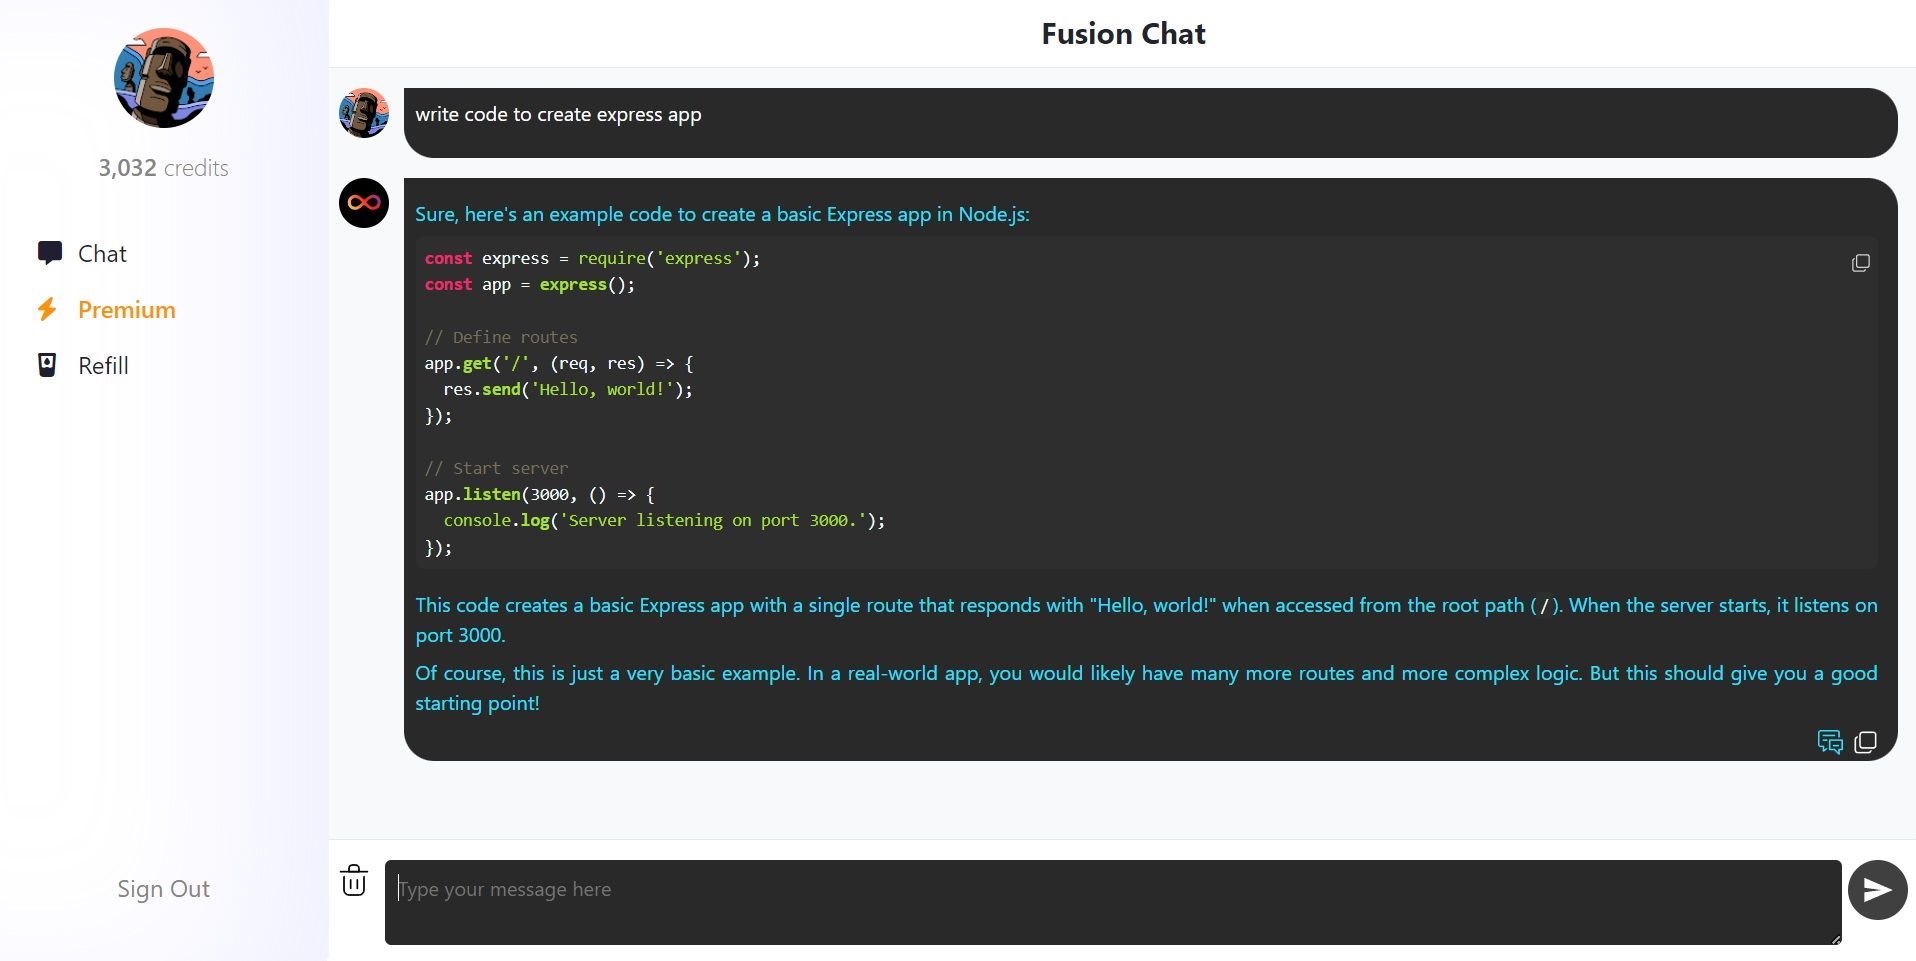 Fusion Chat - AI Chat Assistant